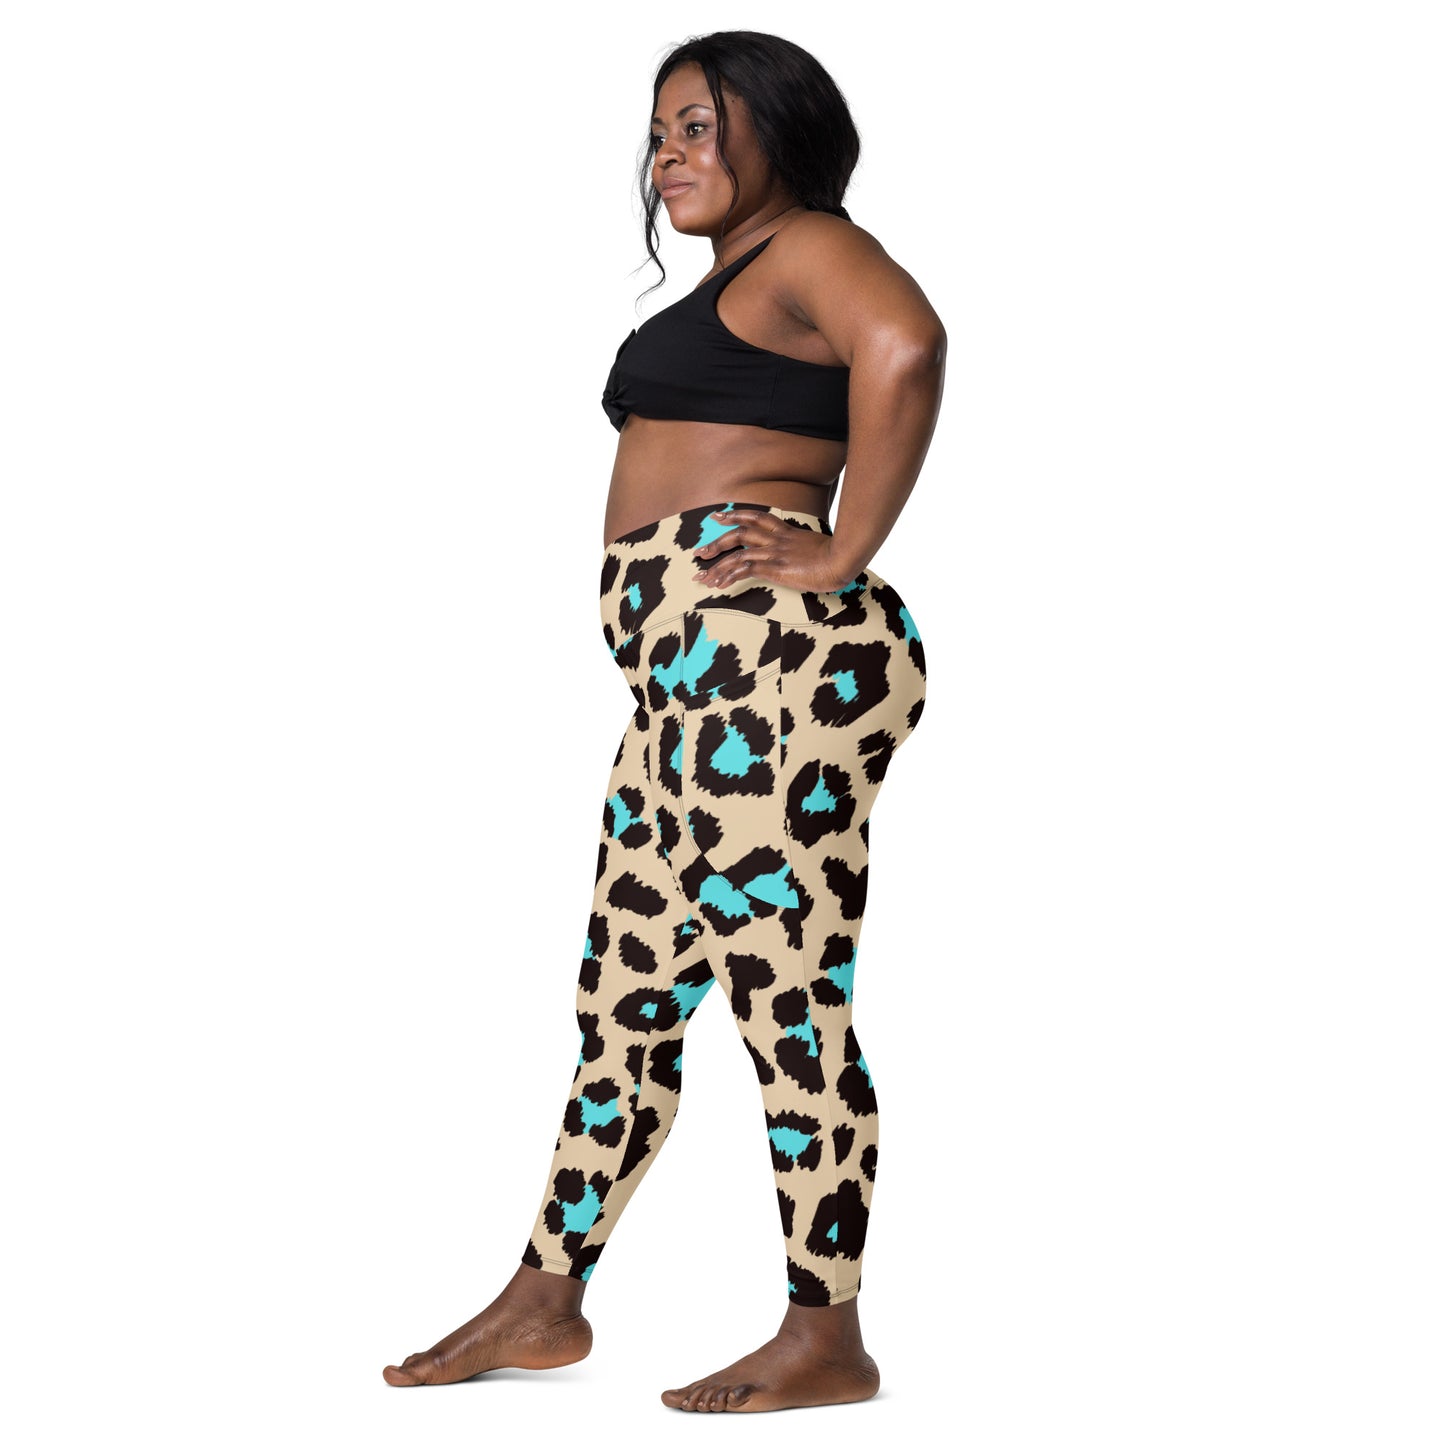 Teal Leopard Comfy Crossover leggings with pockets